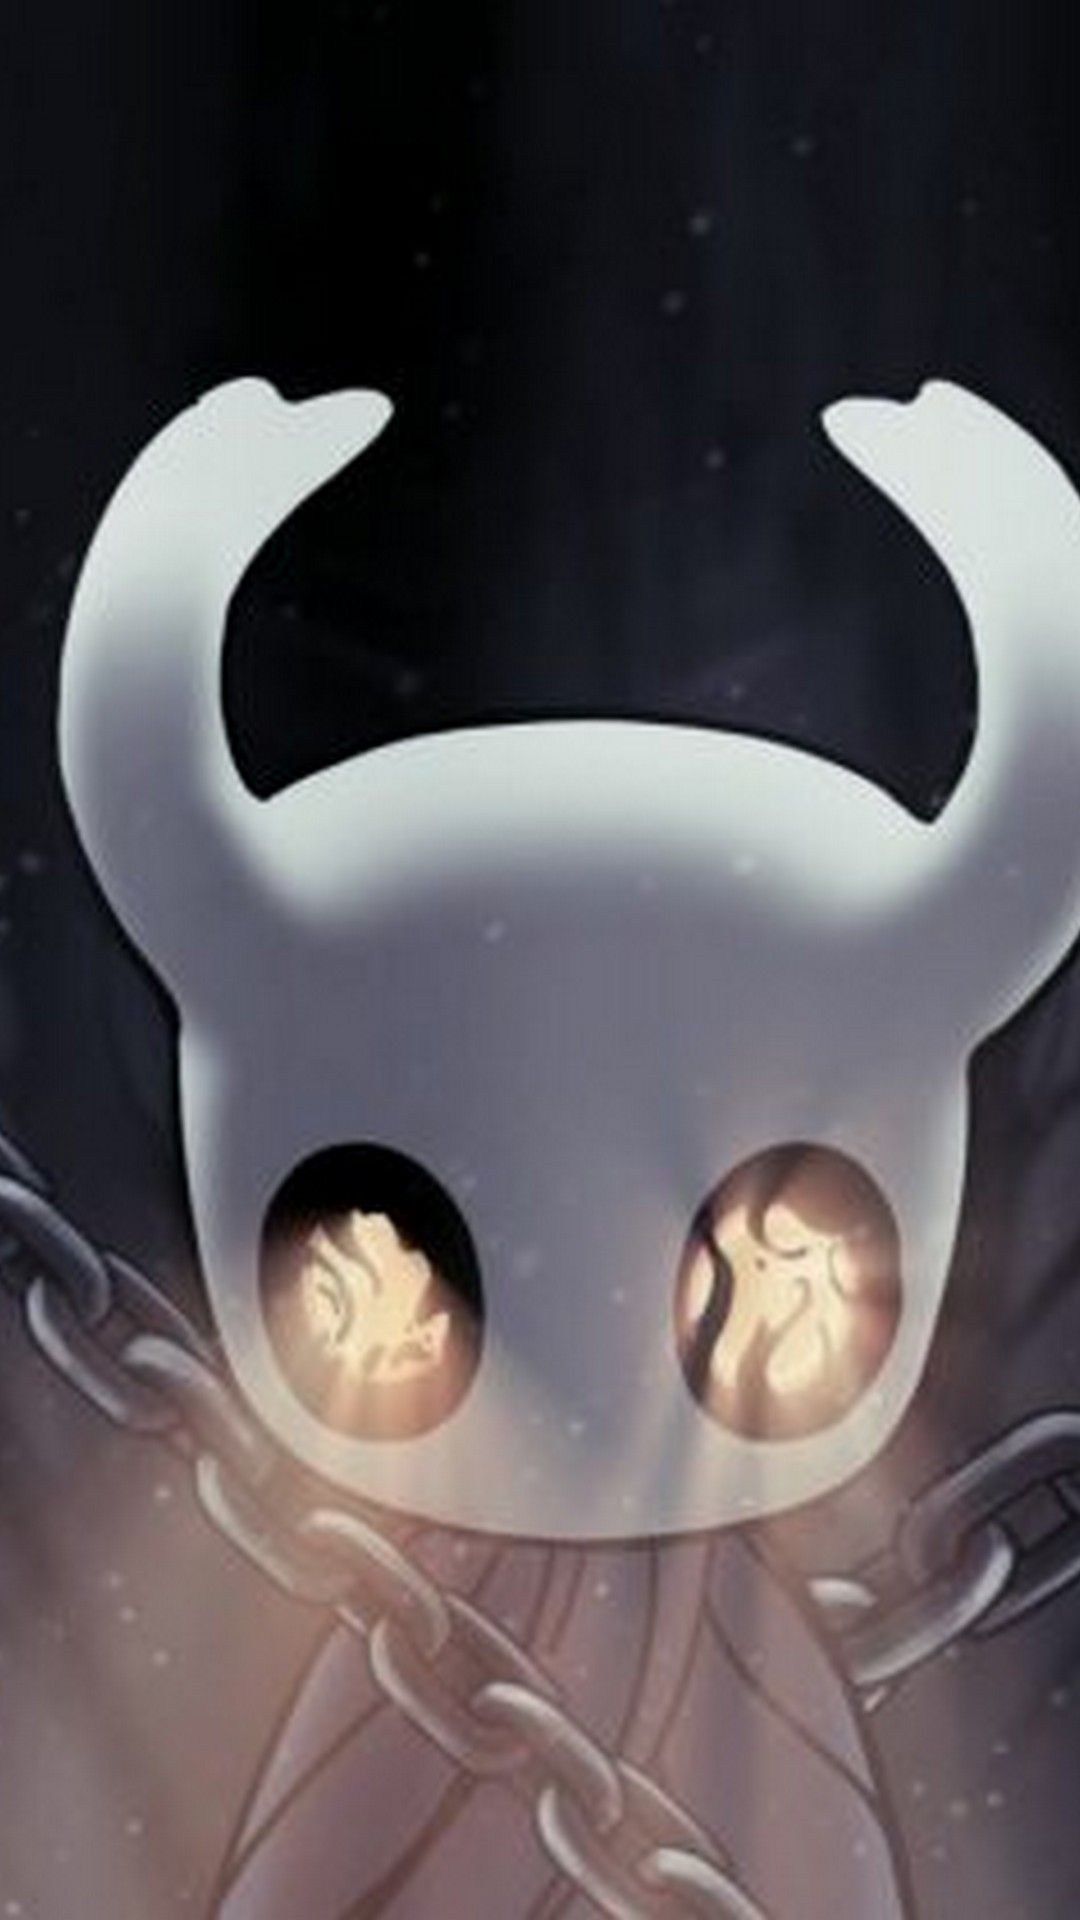 Hollow Knight iPhone X Wallpaper HD With High Resolution